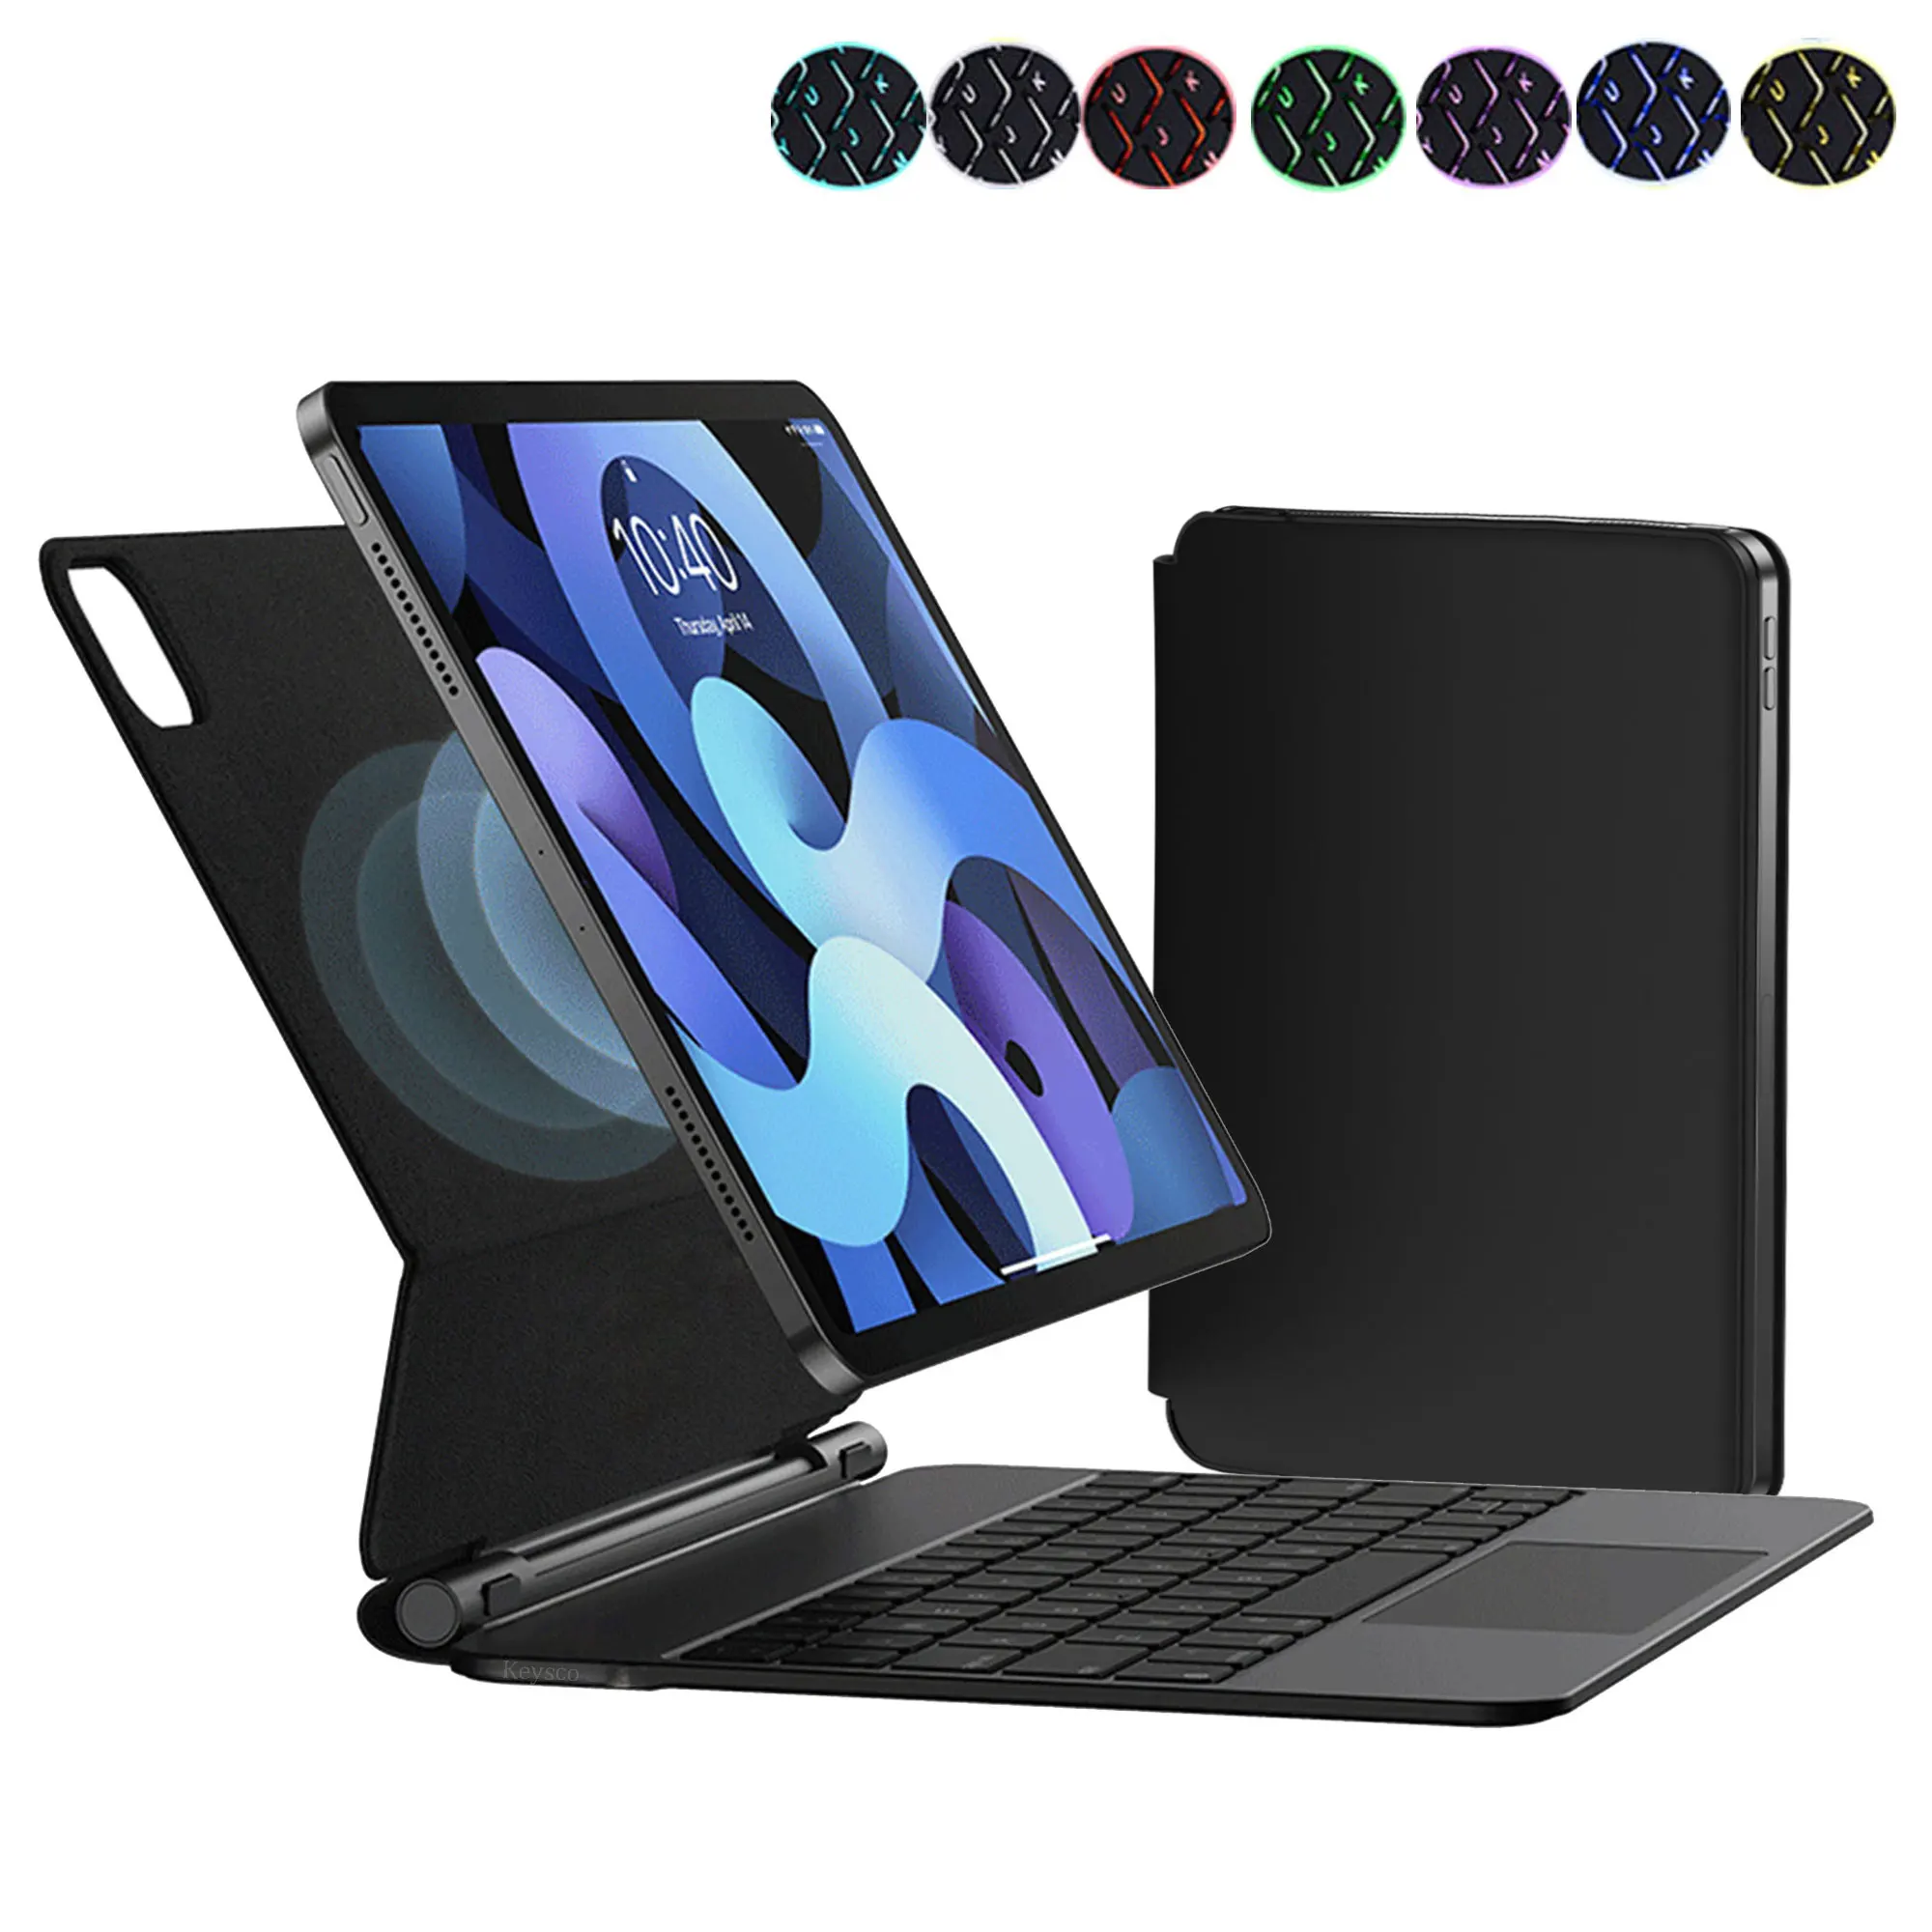 Magic Keyboard For iPad Pro 11 2021 2018 Air 4 5 2020 2022 Folio Touch Backlit Trackpad Magnetic Smart Wireless Keyboard Cases